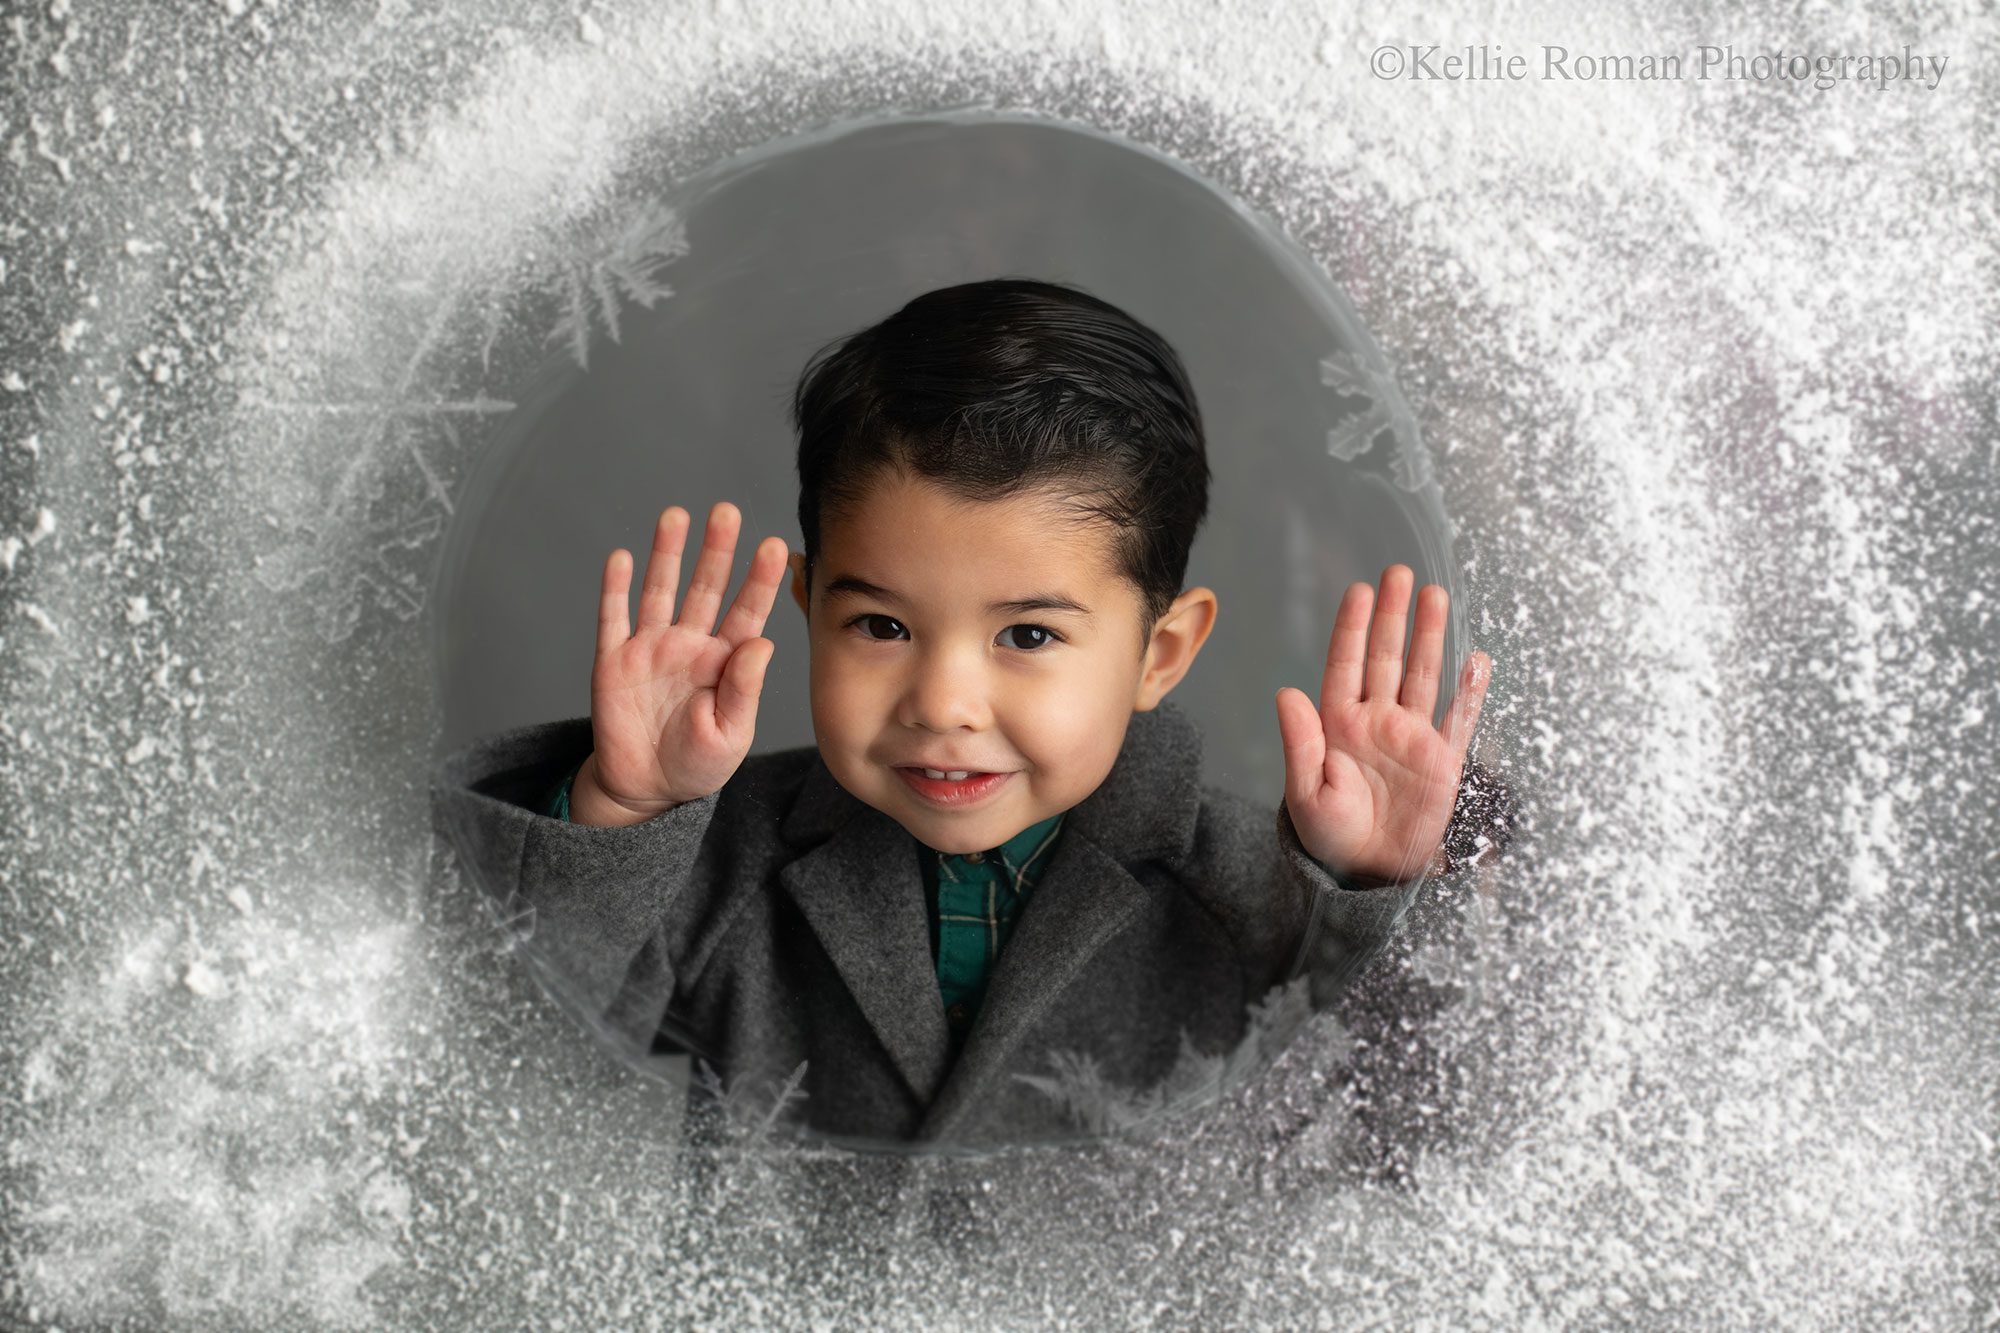 birthday photographer milwaukee. a boy is standing behind glass with snow and putting his hands up while looking through it smiling. he has a grey jacket on with dark black hair. 